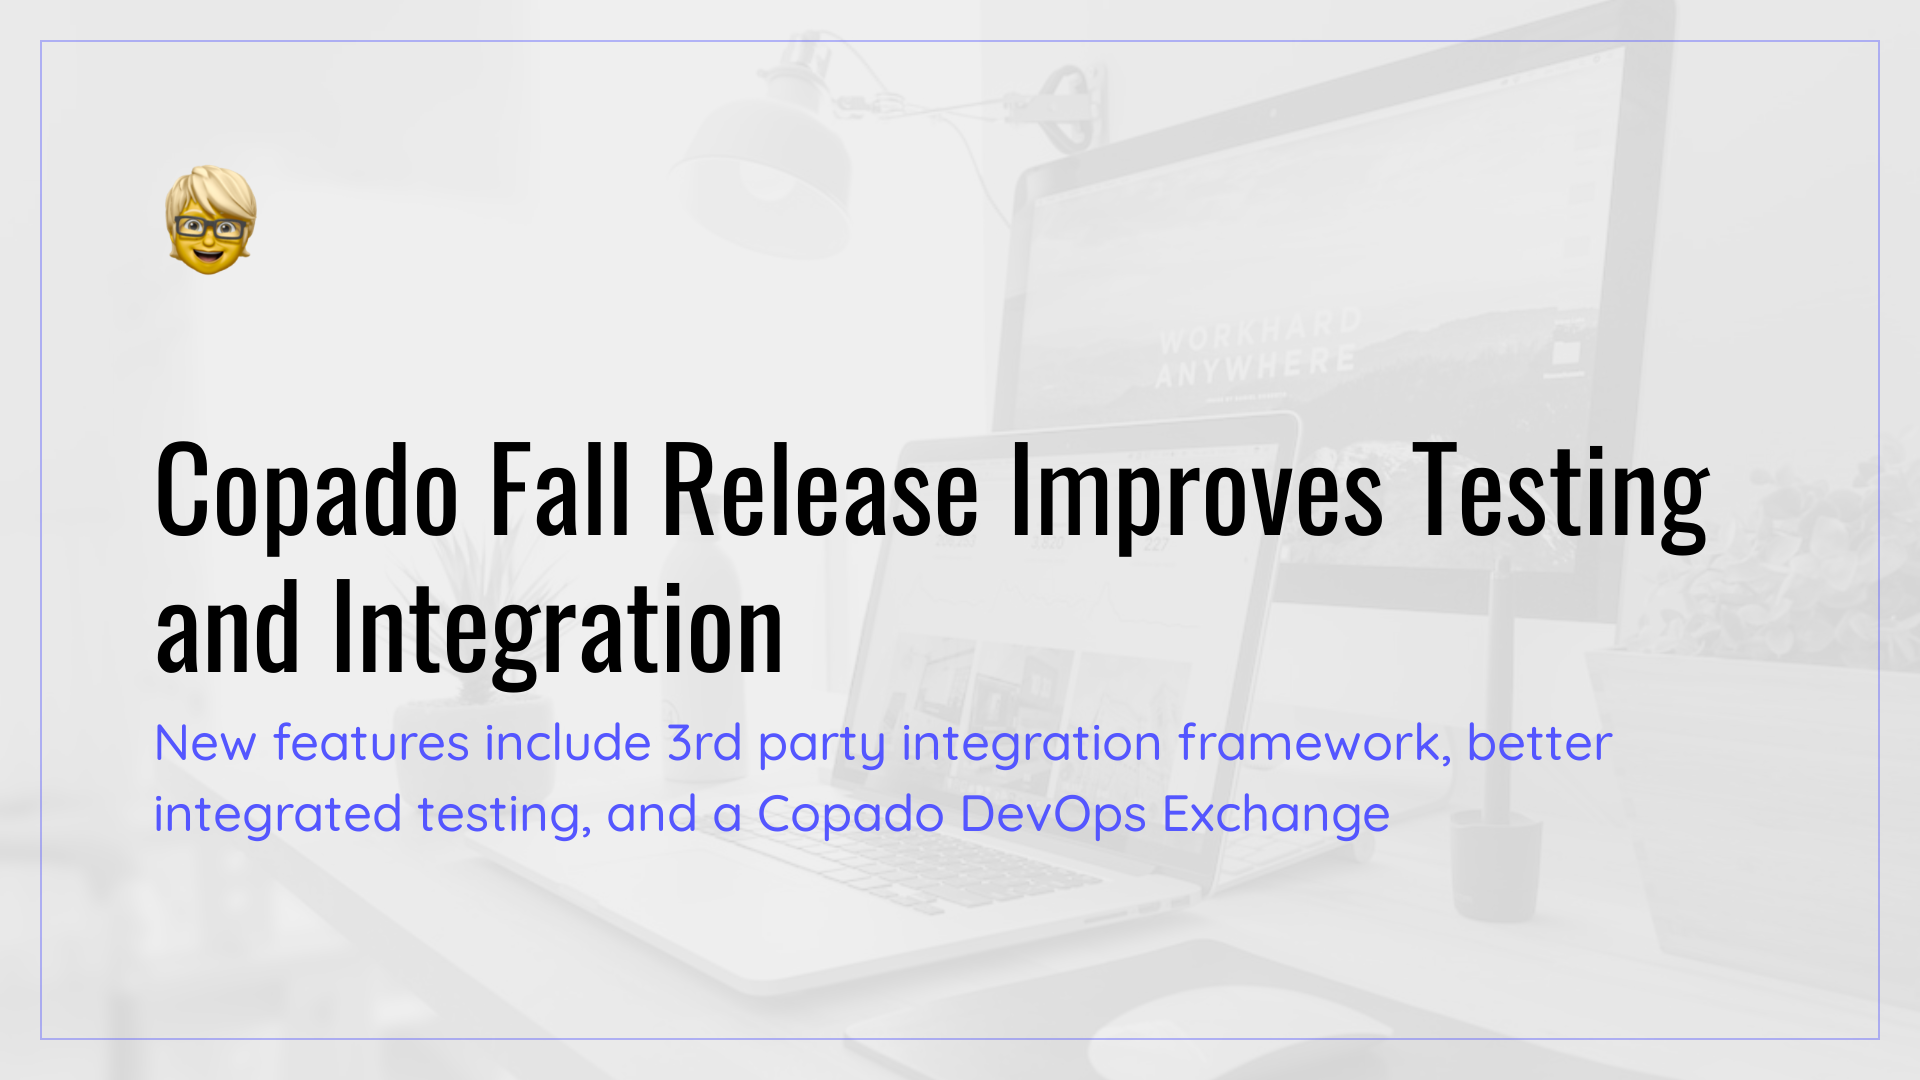 Copado Fall Release Improves Testing and Integration